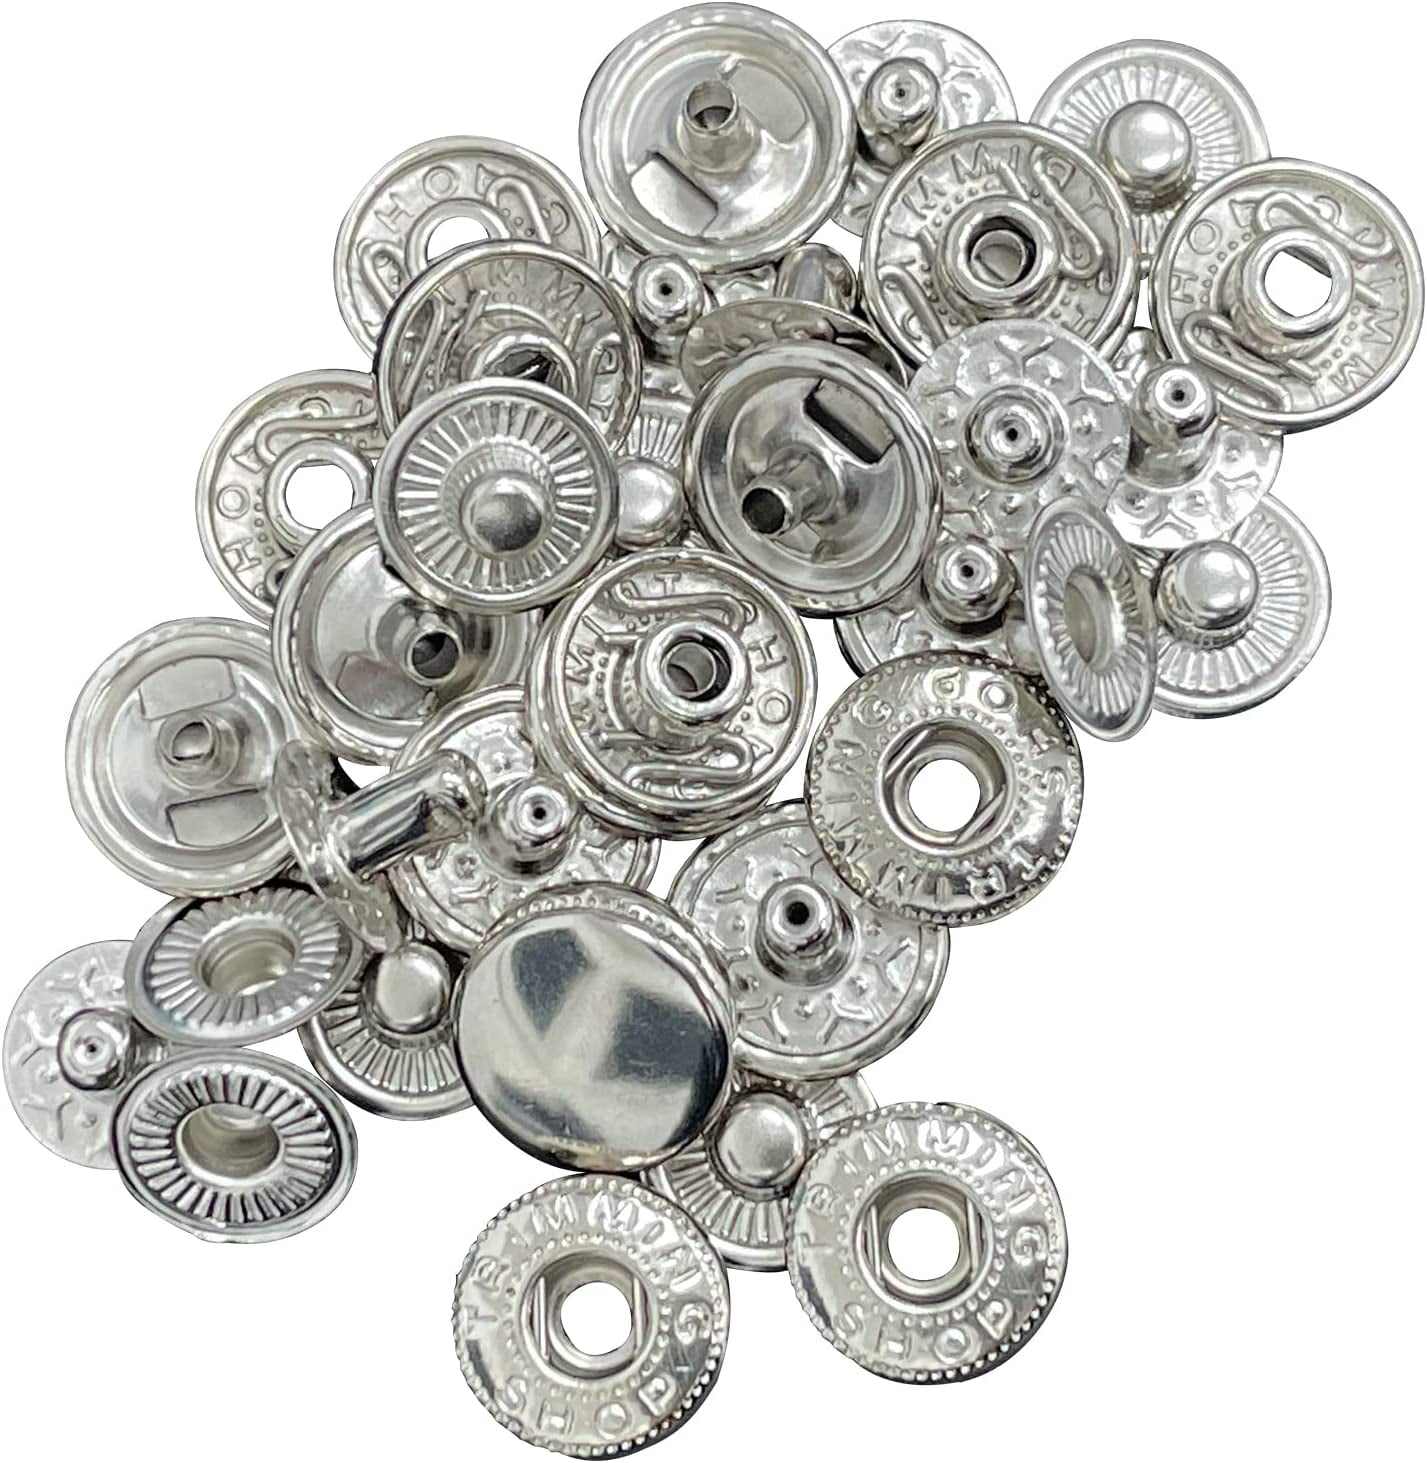 Trimming Shop 20mm S Spring Press Studs 4 Part, Durable and Lightweight, Metal  Snap Buttons Fasteners for Jackets, DIY Leathercrafts, Sewing Clothing,  Purses, Silver, 50pcs 